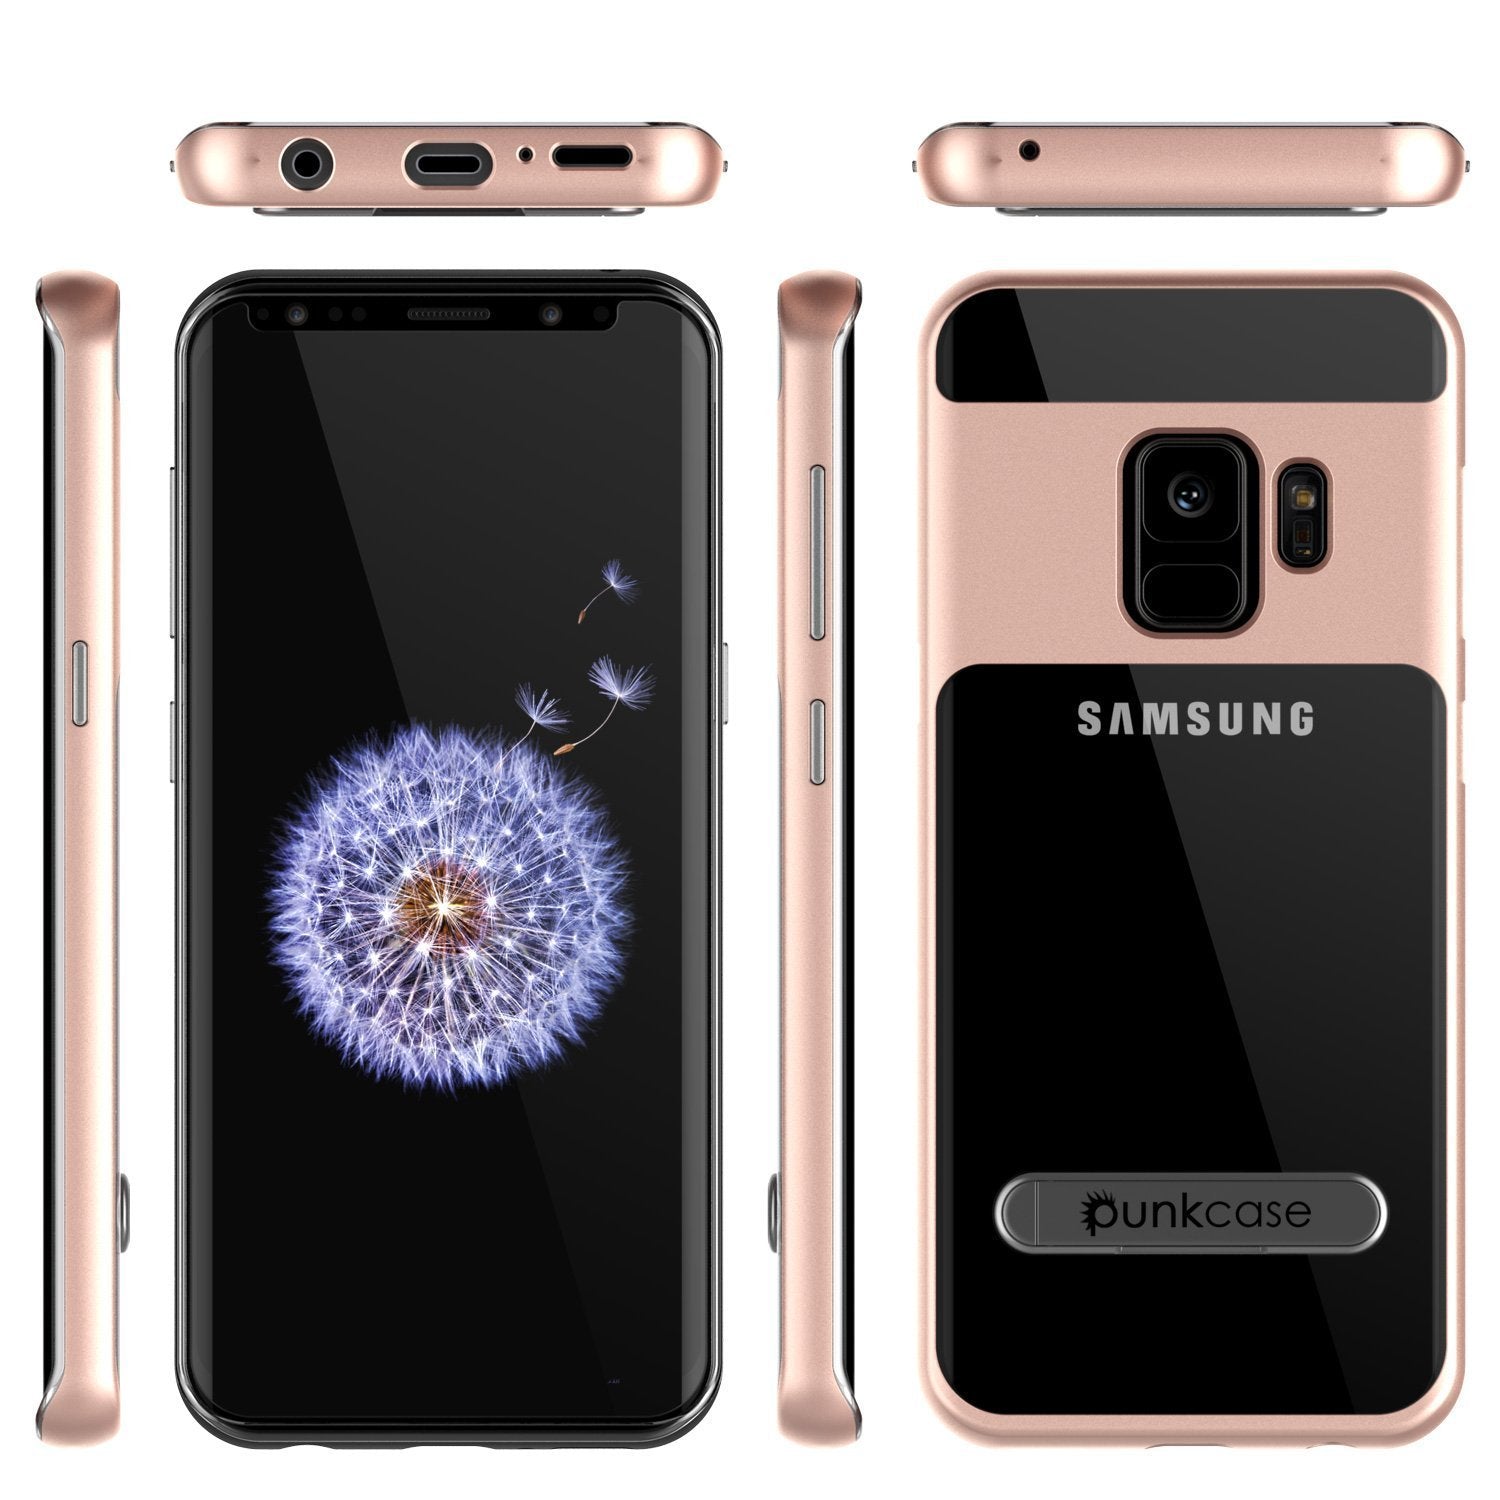 Galaxy S9 Case, PUNKcase [LUCID 3.0 Series] [Slim Fit] [Clear Back] Armor Cover w/ Integrated Kickstand, Anti-Shock System & PUNKSHIELD Screen Protector for Samsung Galaxy S9 [Rose Gold] - PunkCase NZ